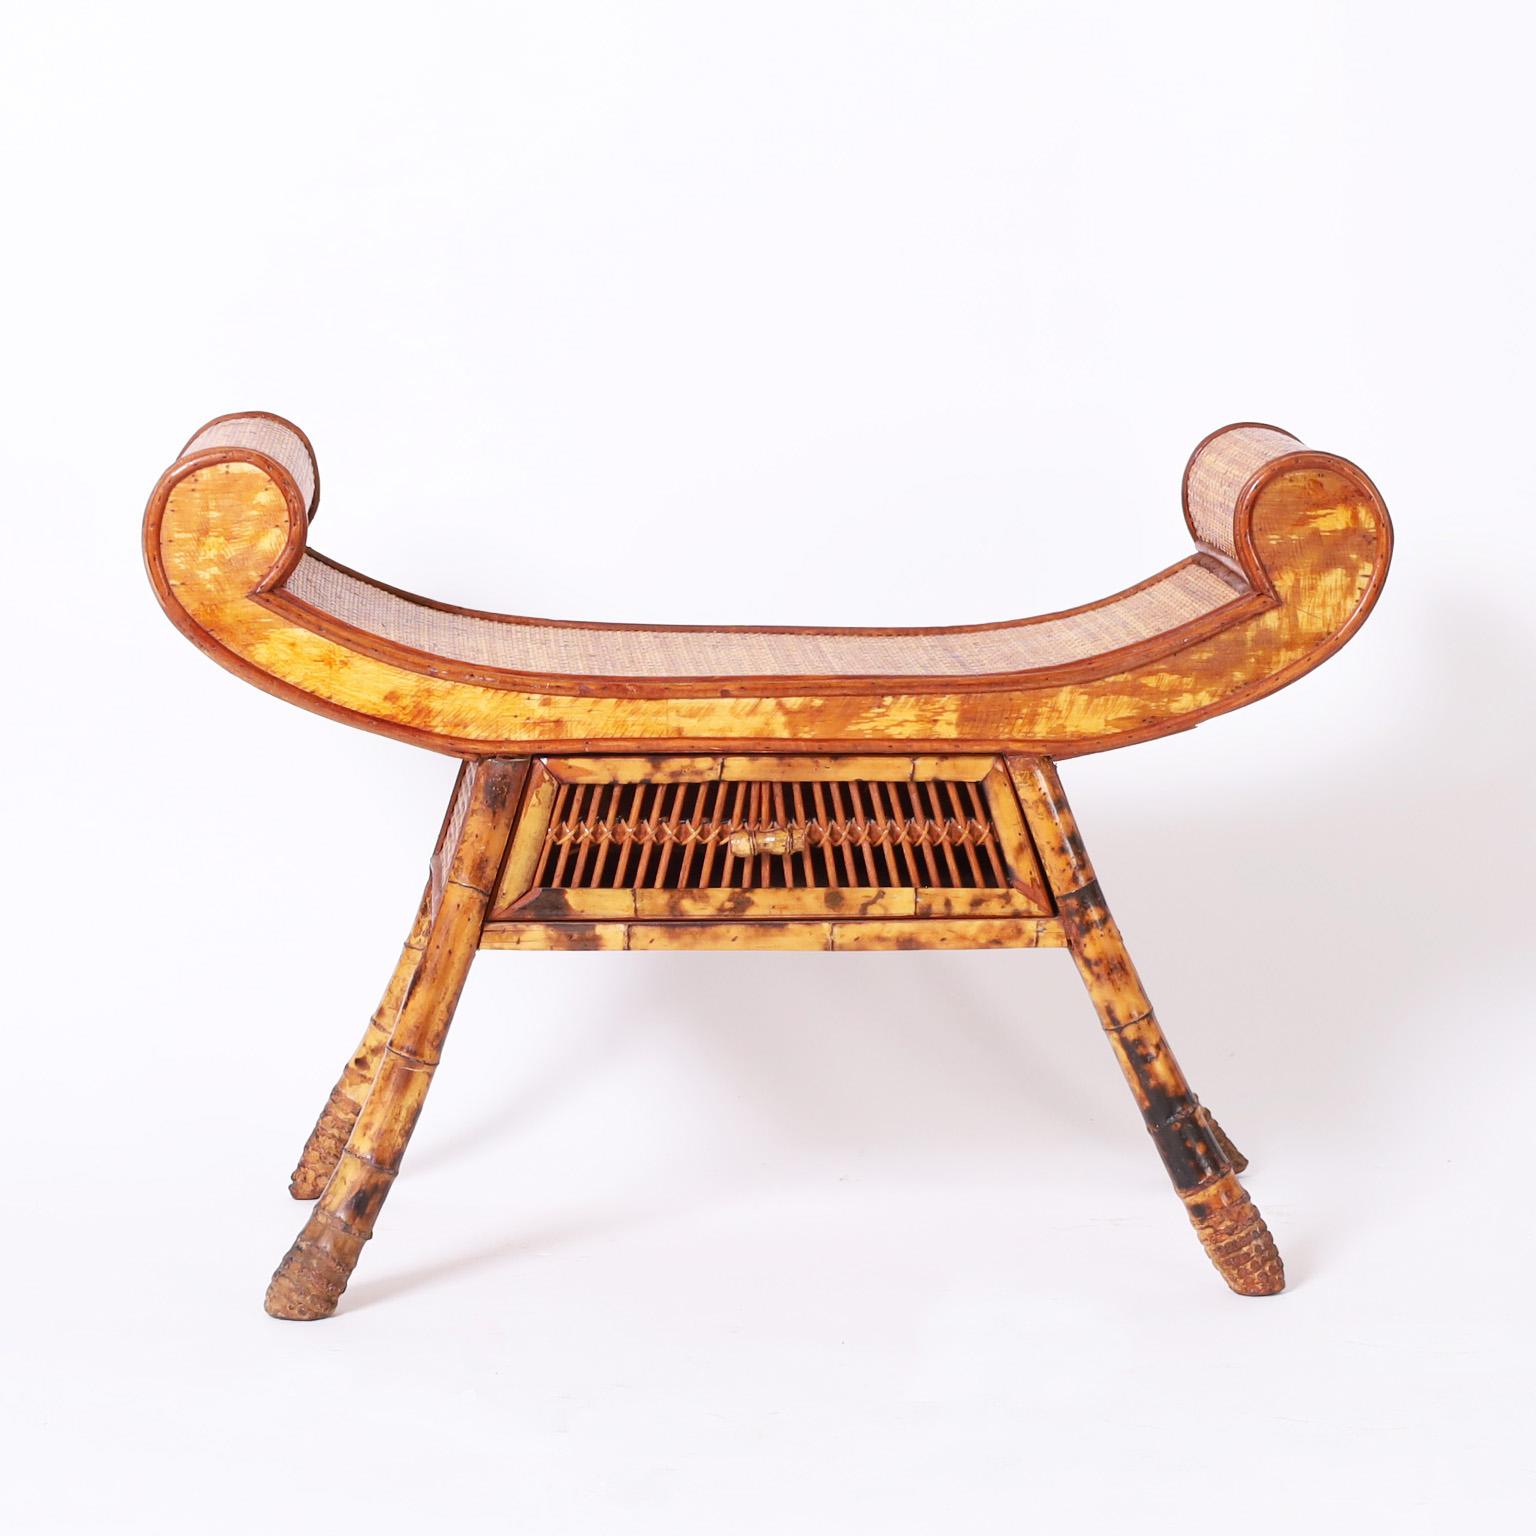 Midcentury Asian style bench having an elegant rolled seat covered in grasscloth bordered with rattan over a case with a drawer on burnt bamboo legs with root feet.